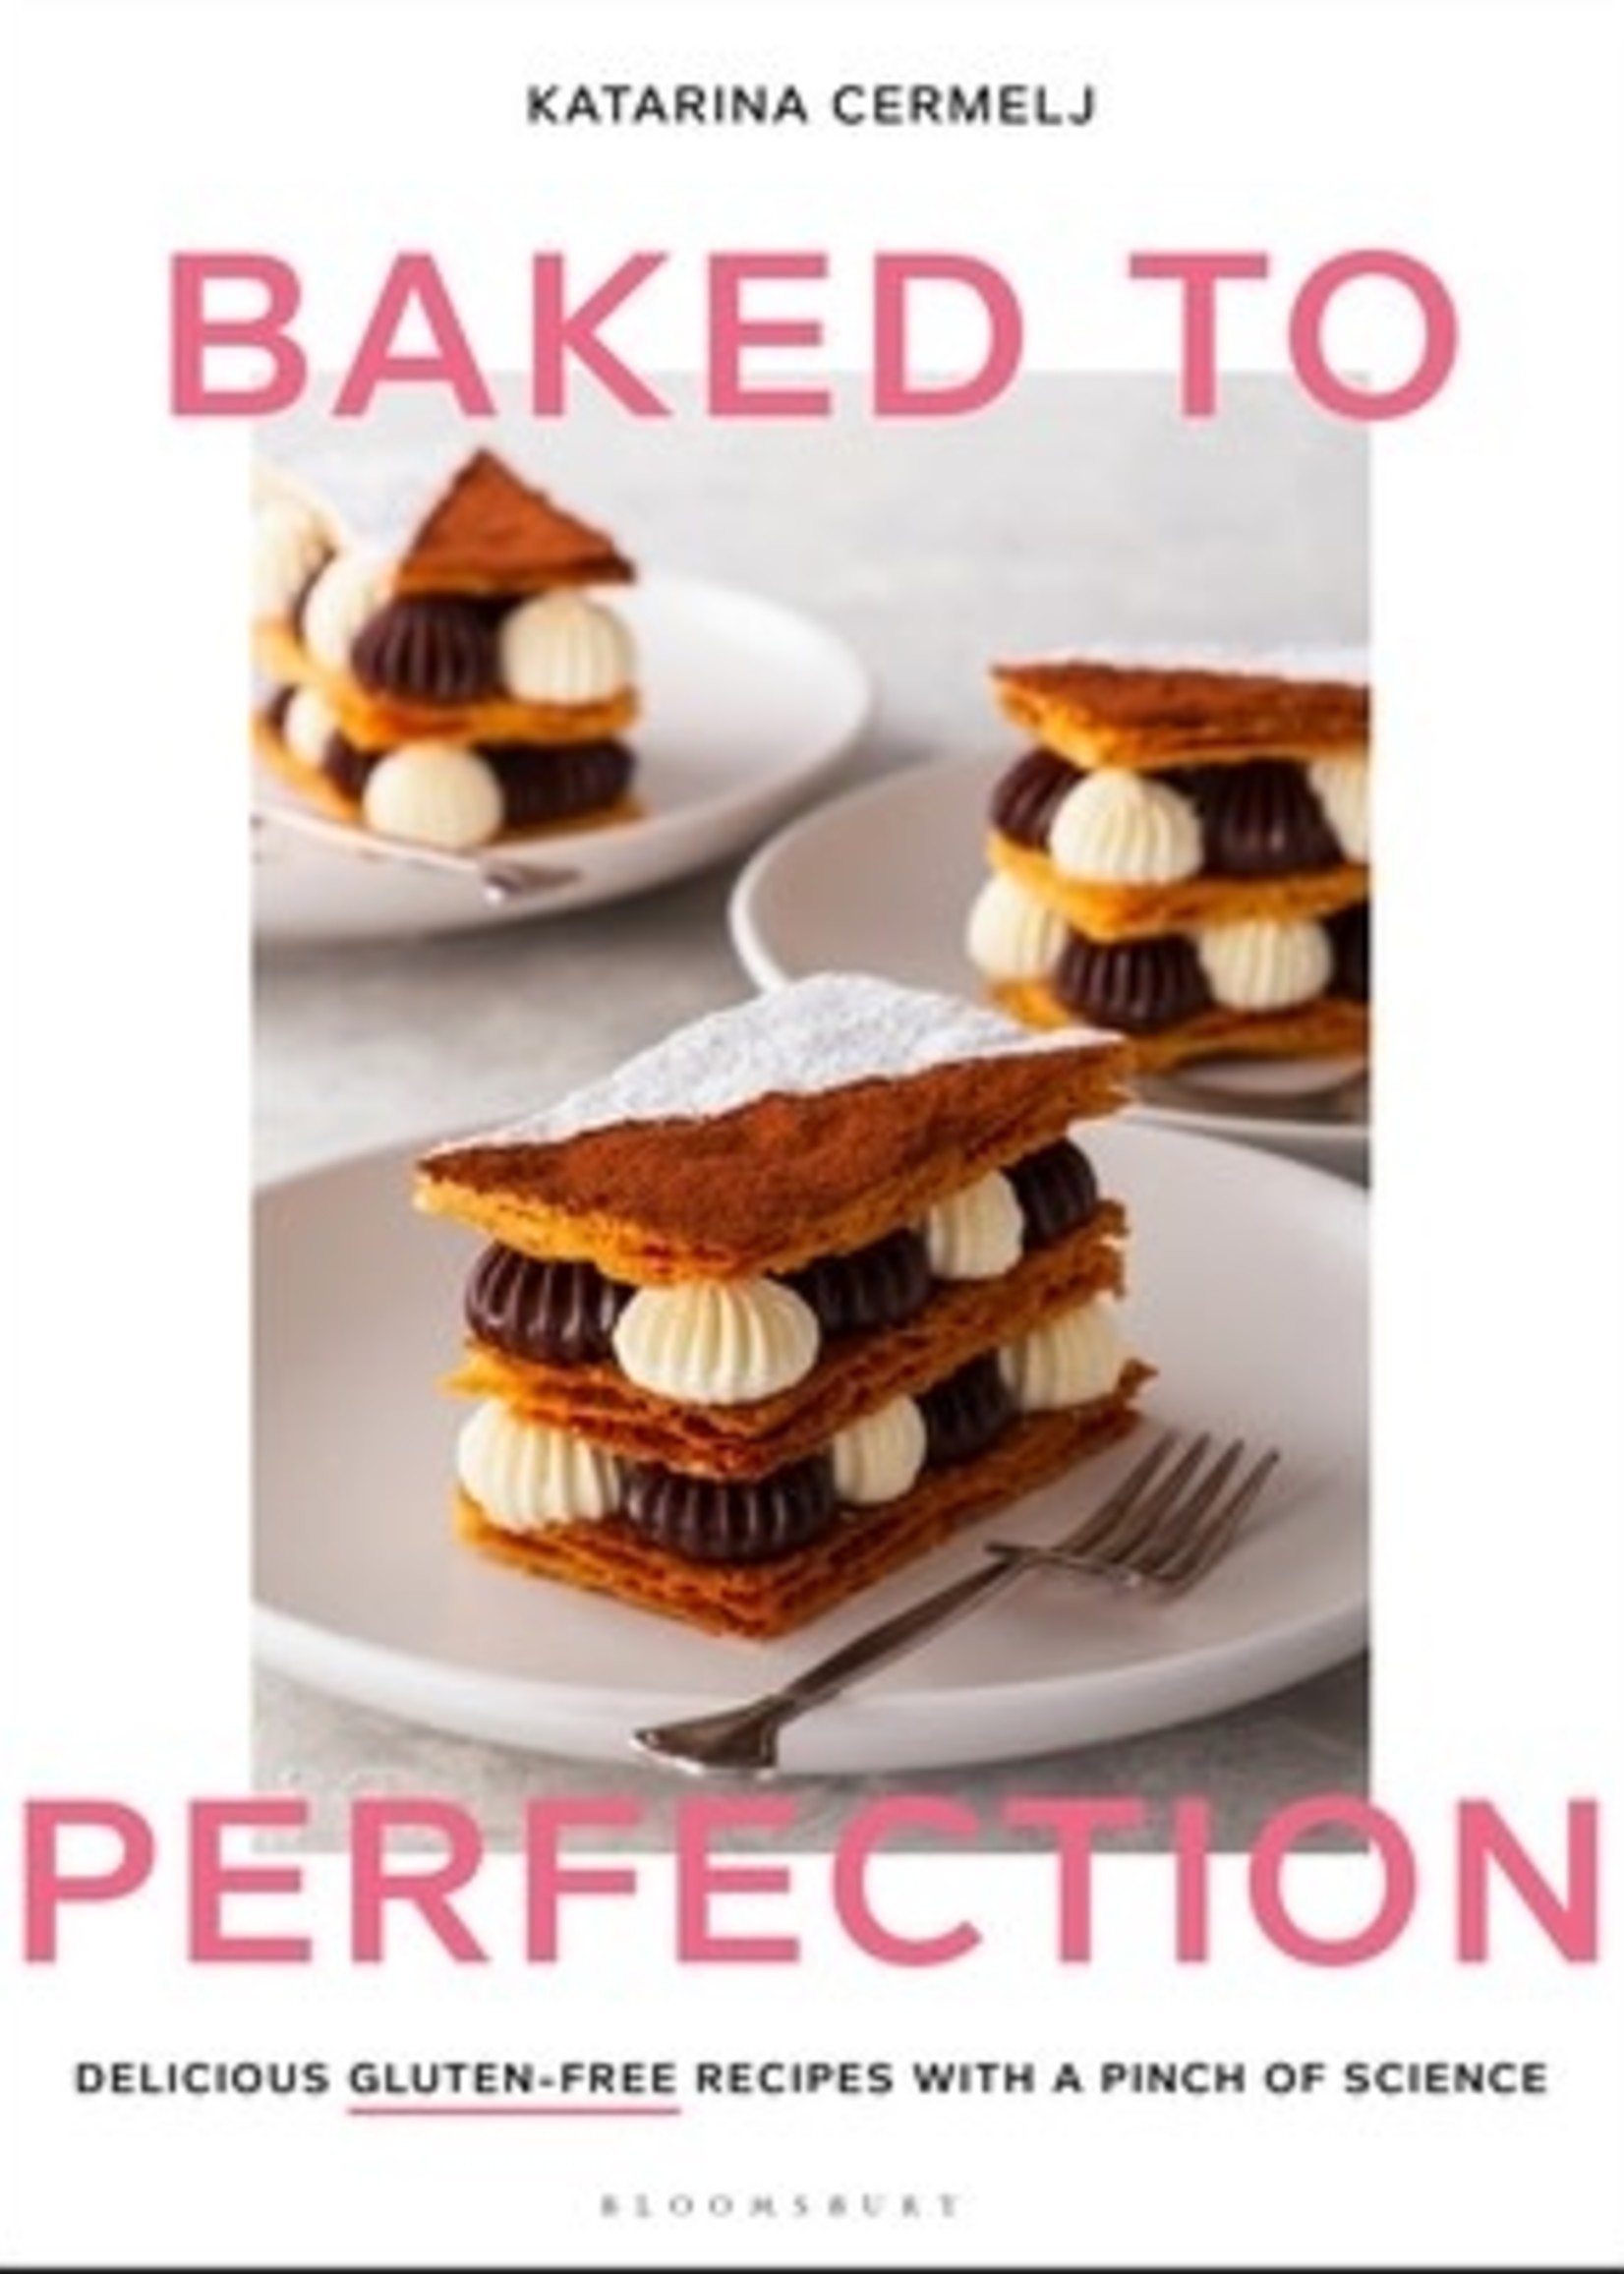 Baked to Perfection: Delicious gluten-free recipes with a pinch of science by Katarina Cermelj